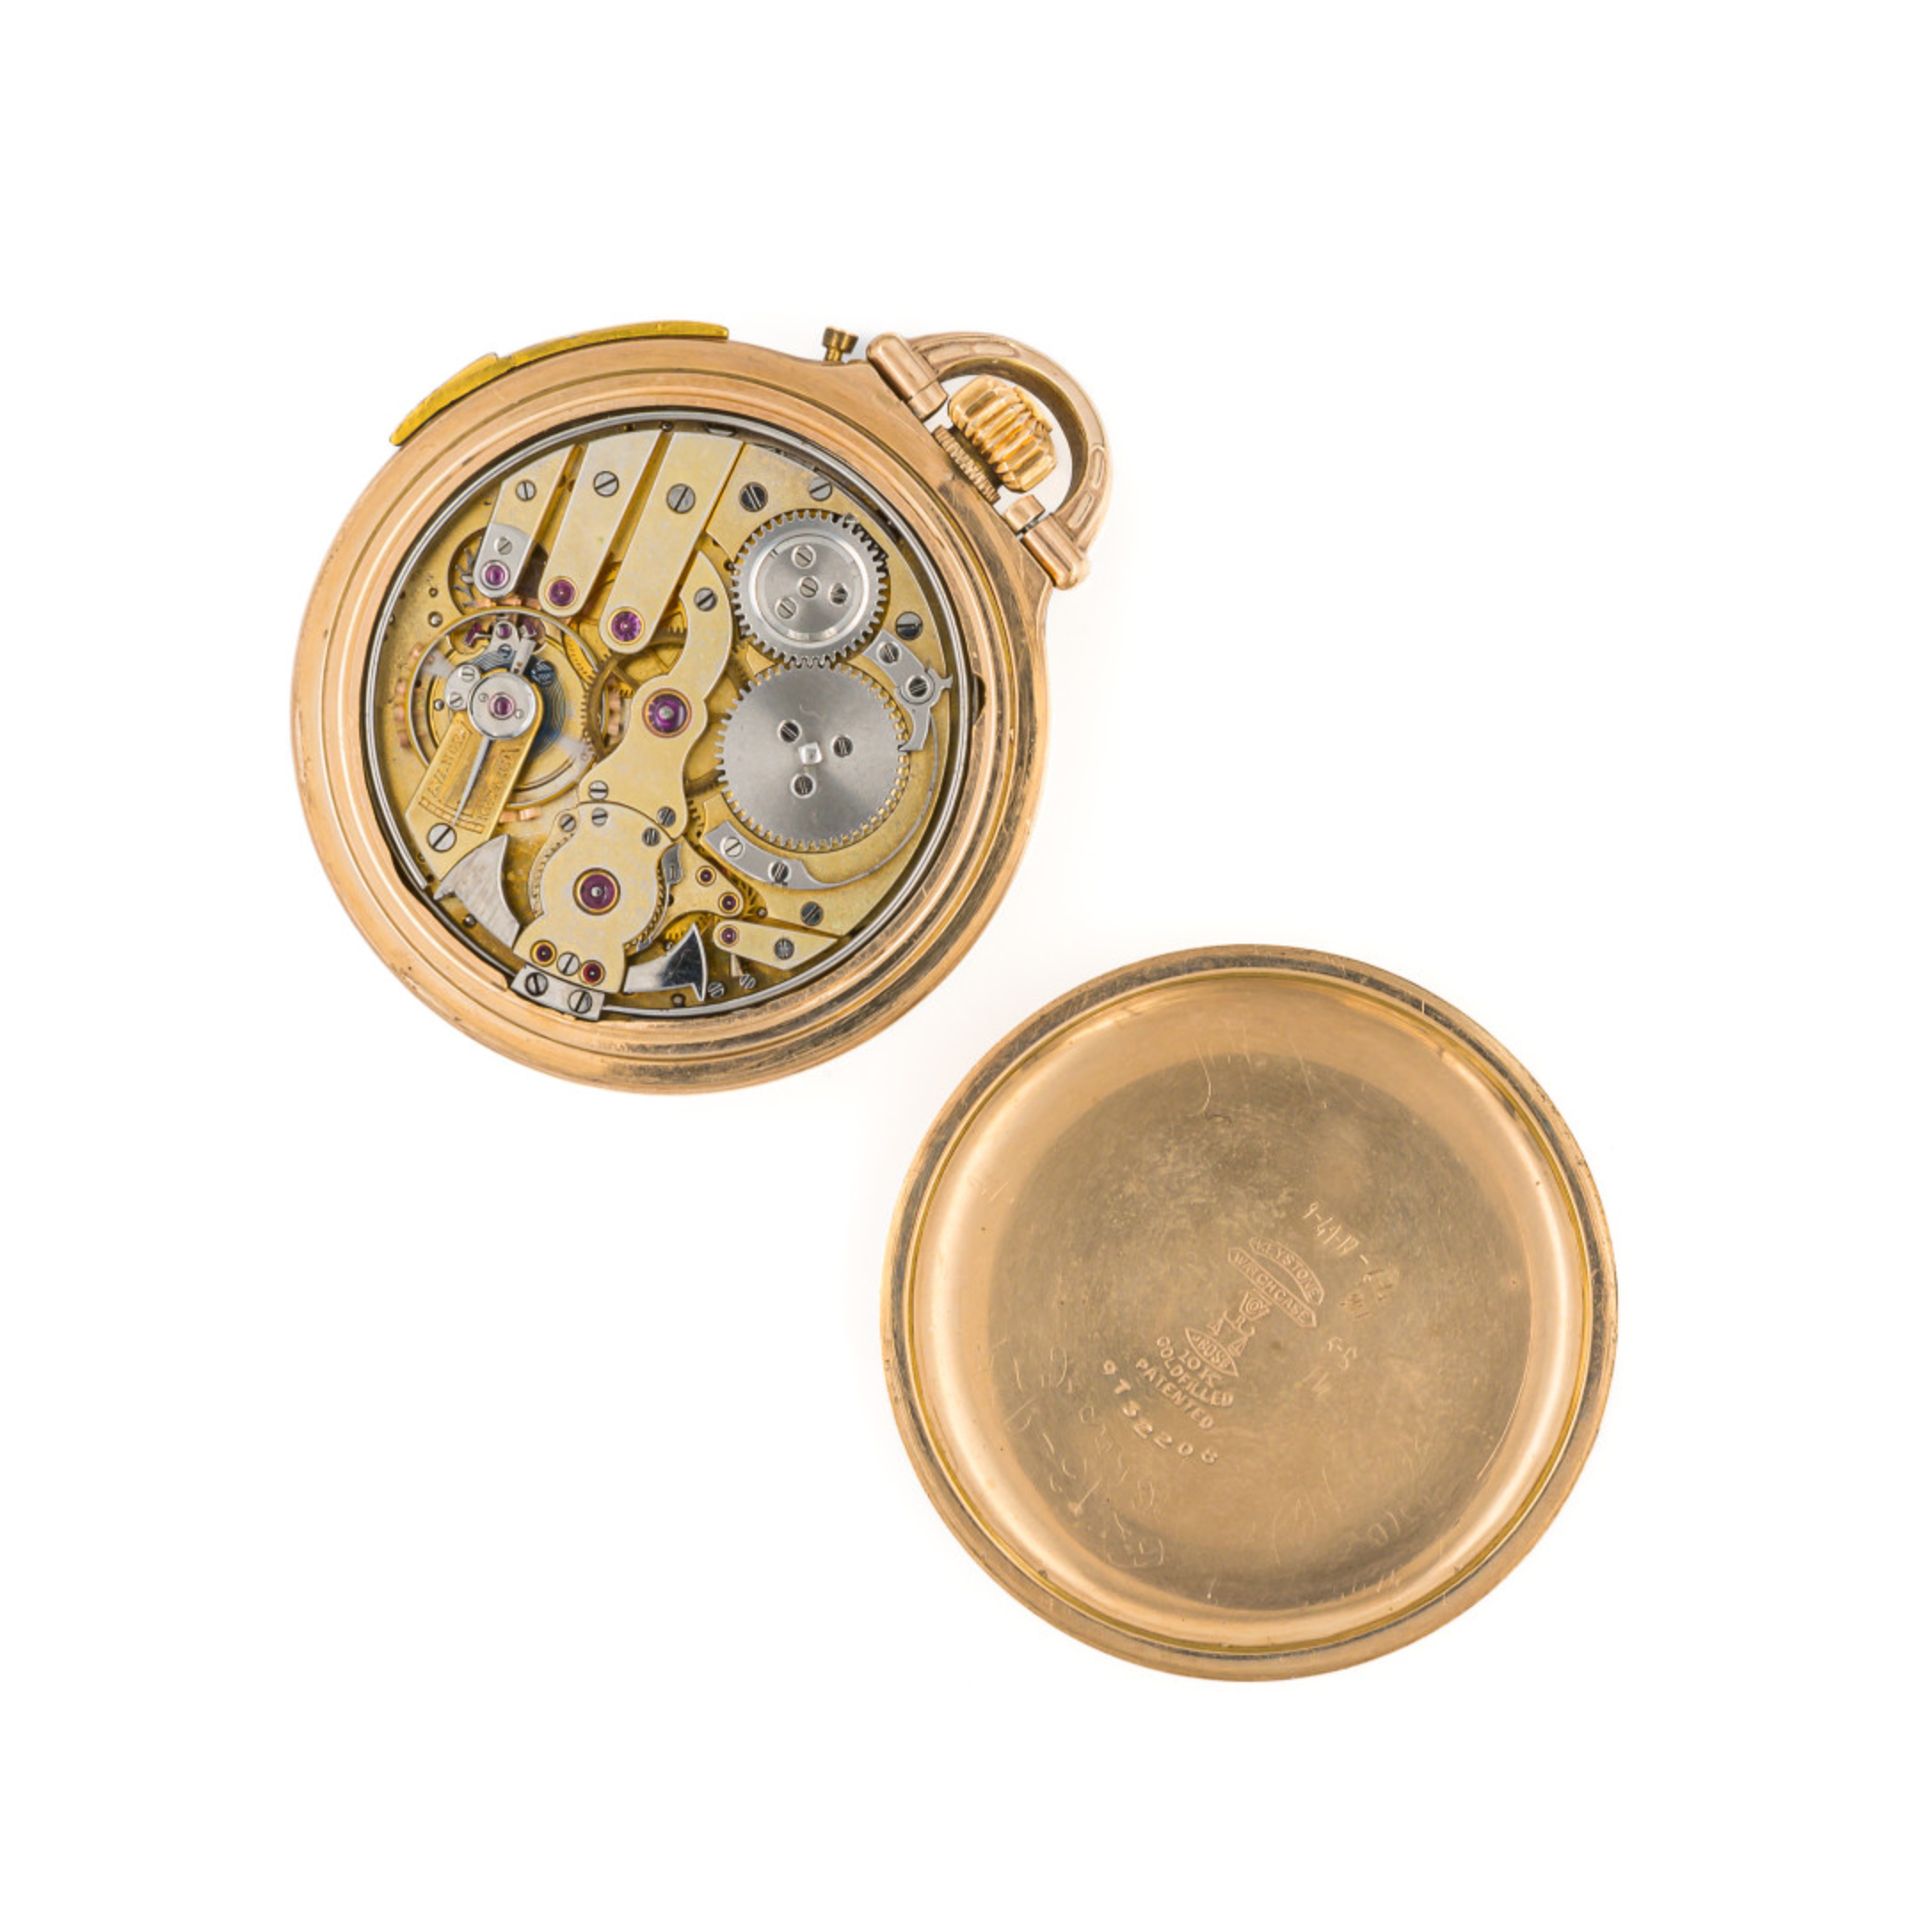 REPEATER WATCH, 20s - REPEATER WATCH, 20S Case: signed Keystone Watch Case, n. 9732208, three-body - Image 2 of 3